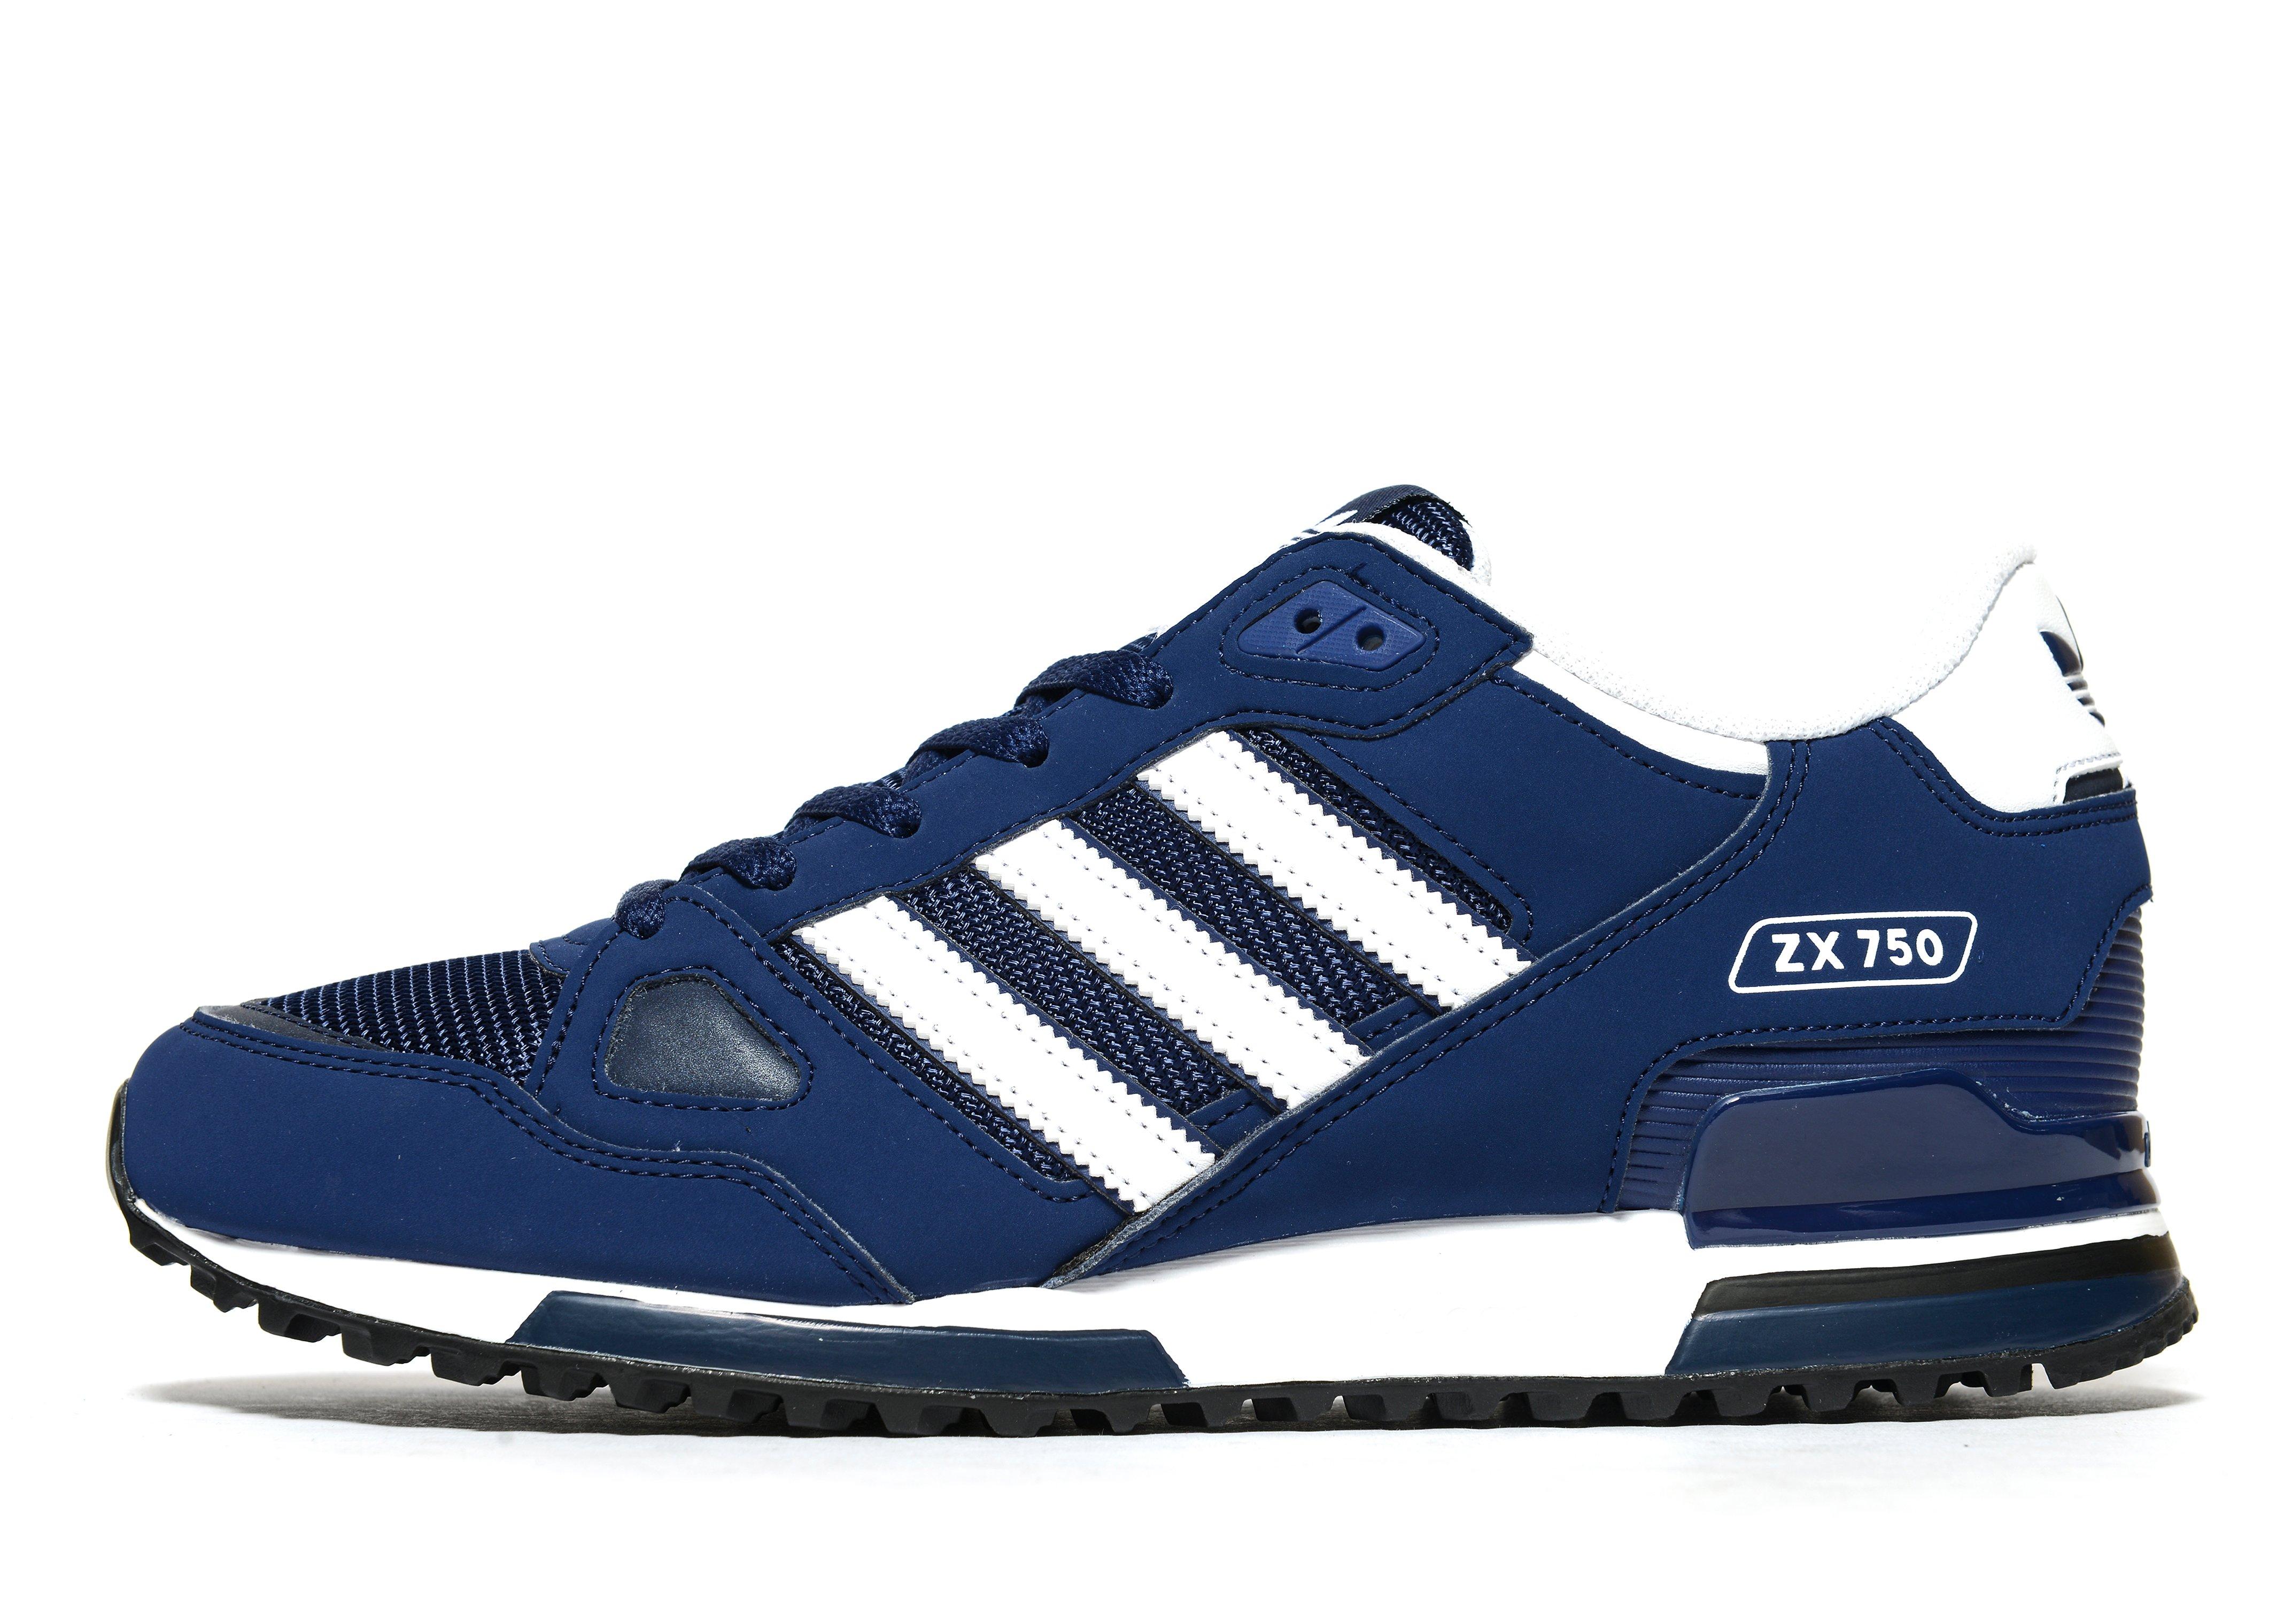 adidas zx 750 blue and white